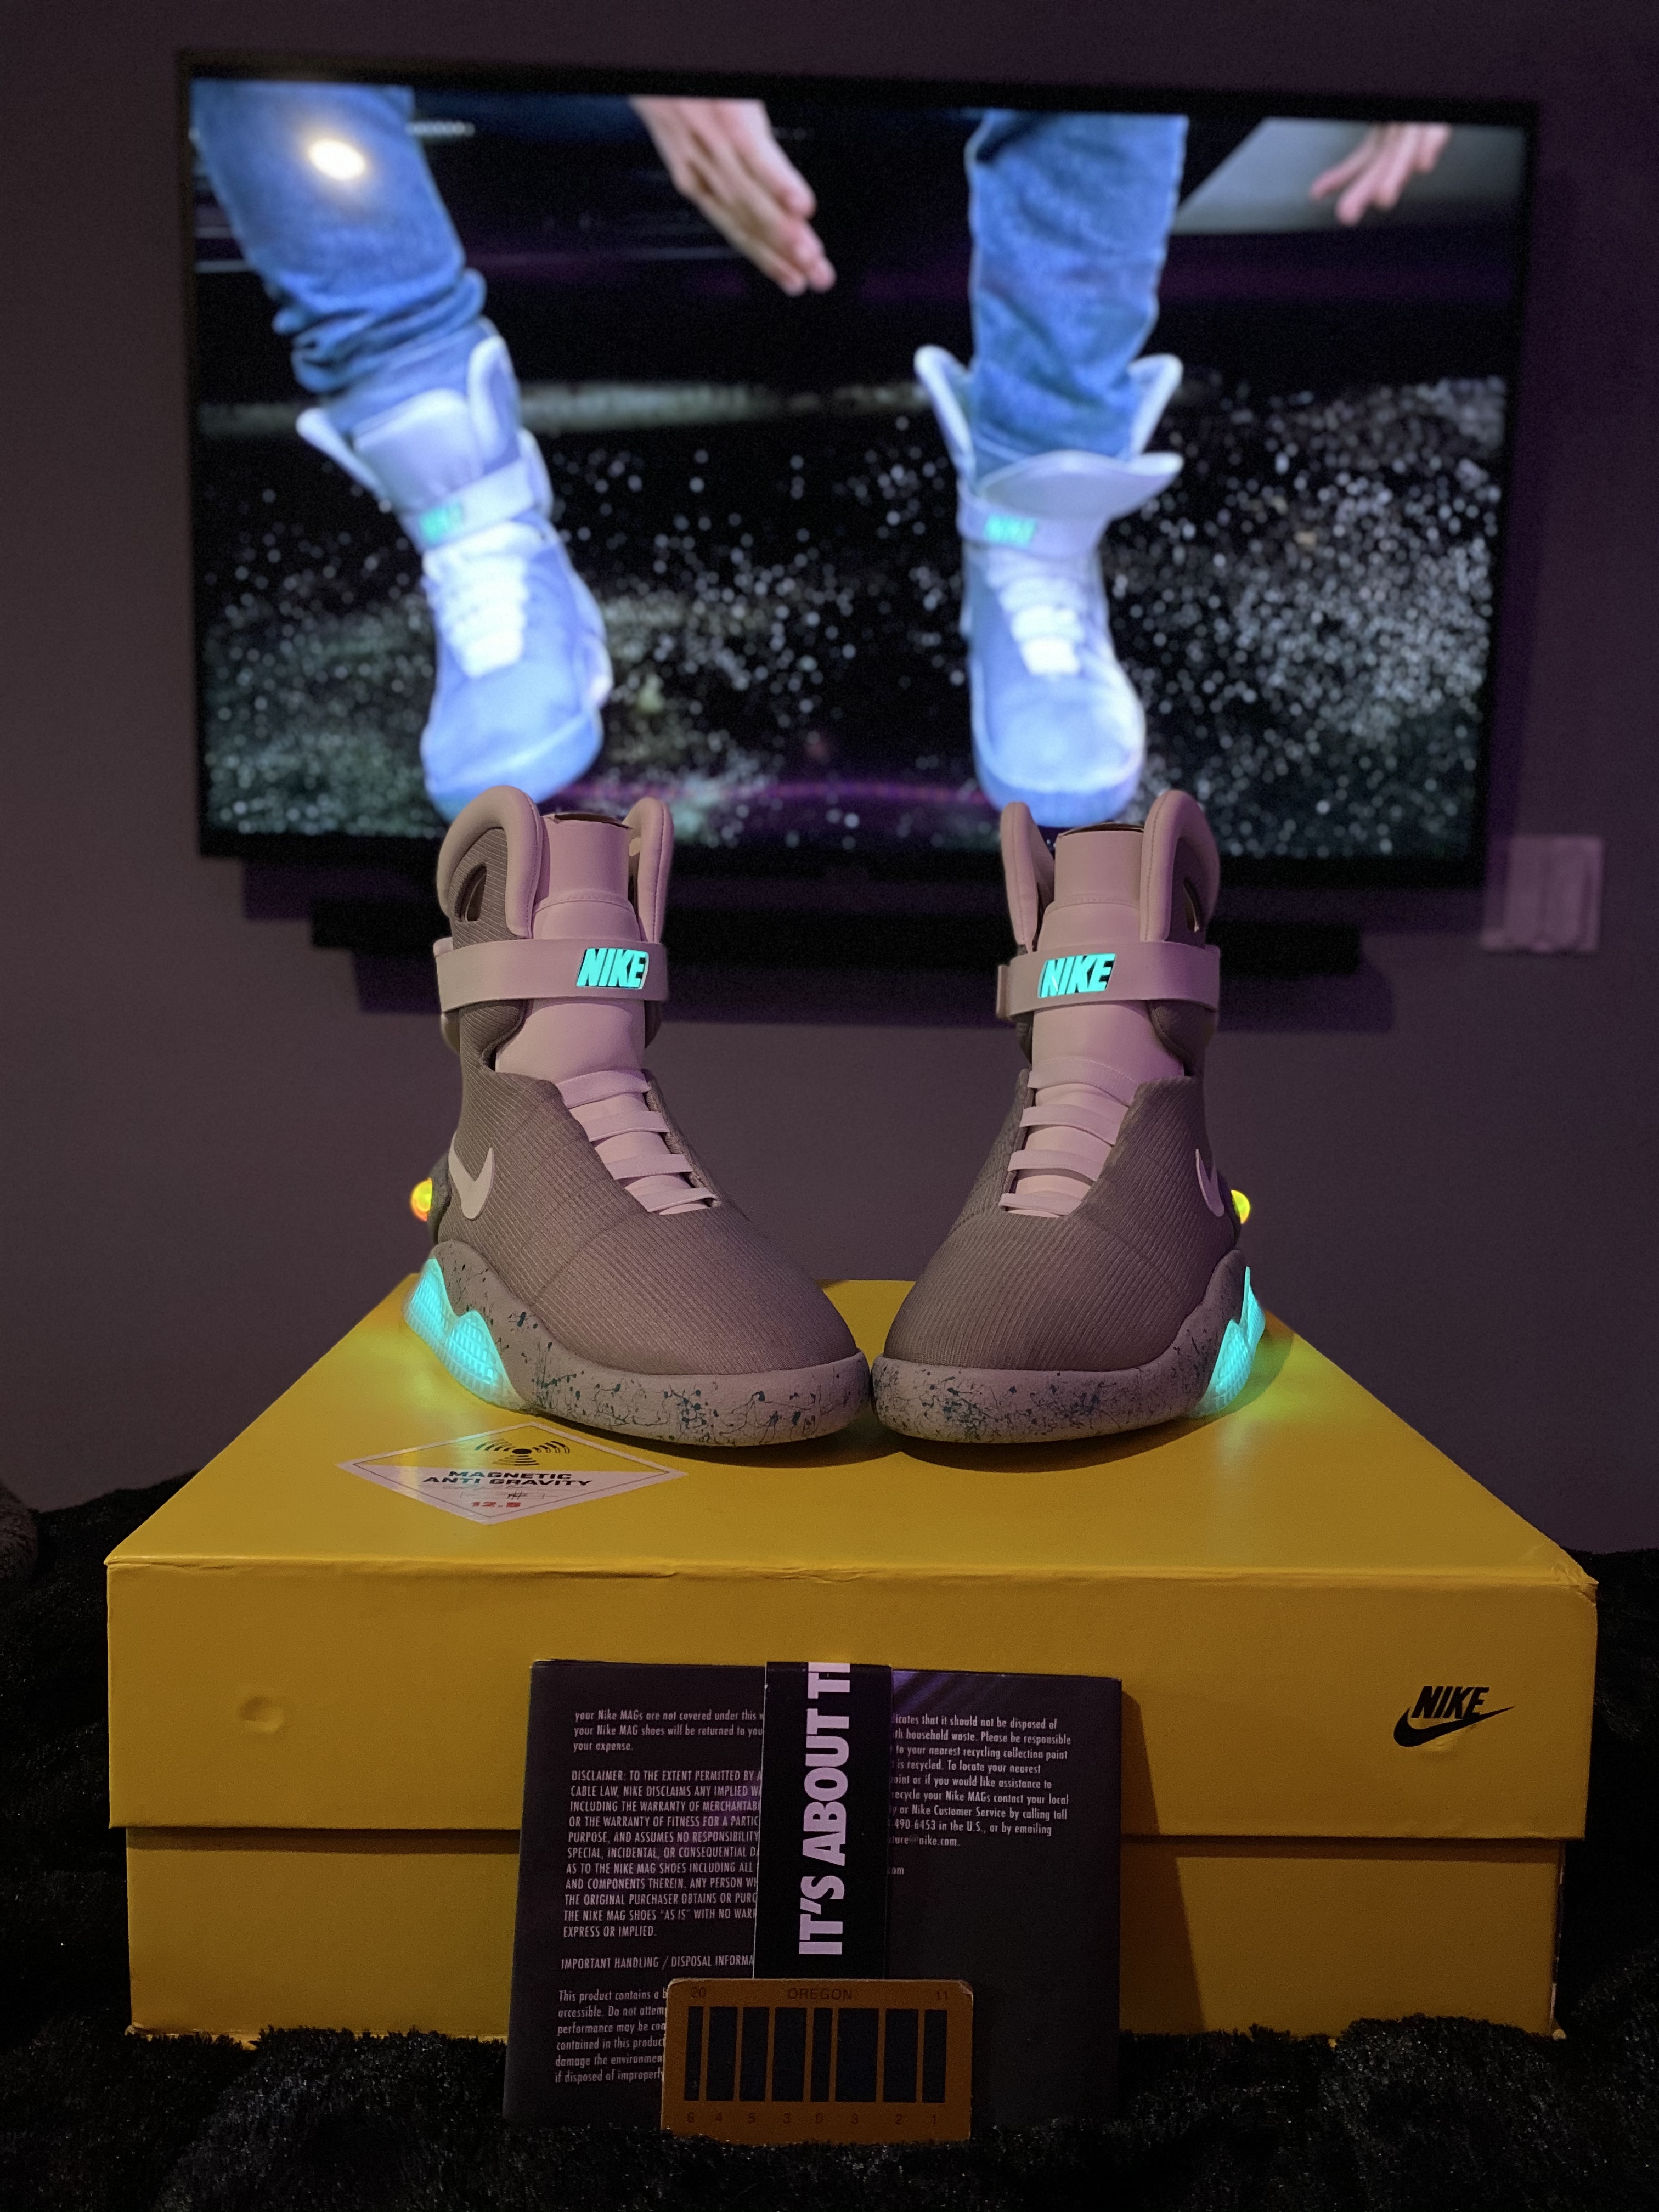 Official V3 Nike MAG Replica Thread - V3 Discussion Thread | Page 193 | RPF  Costume and Prop Maker Community